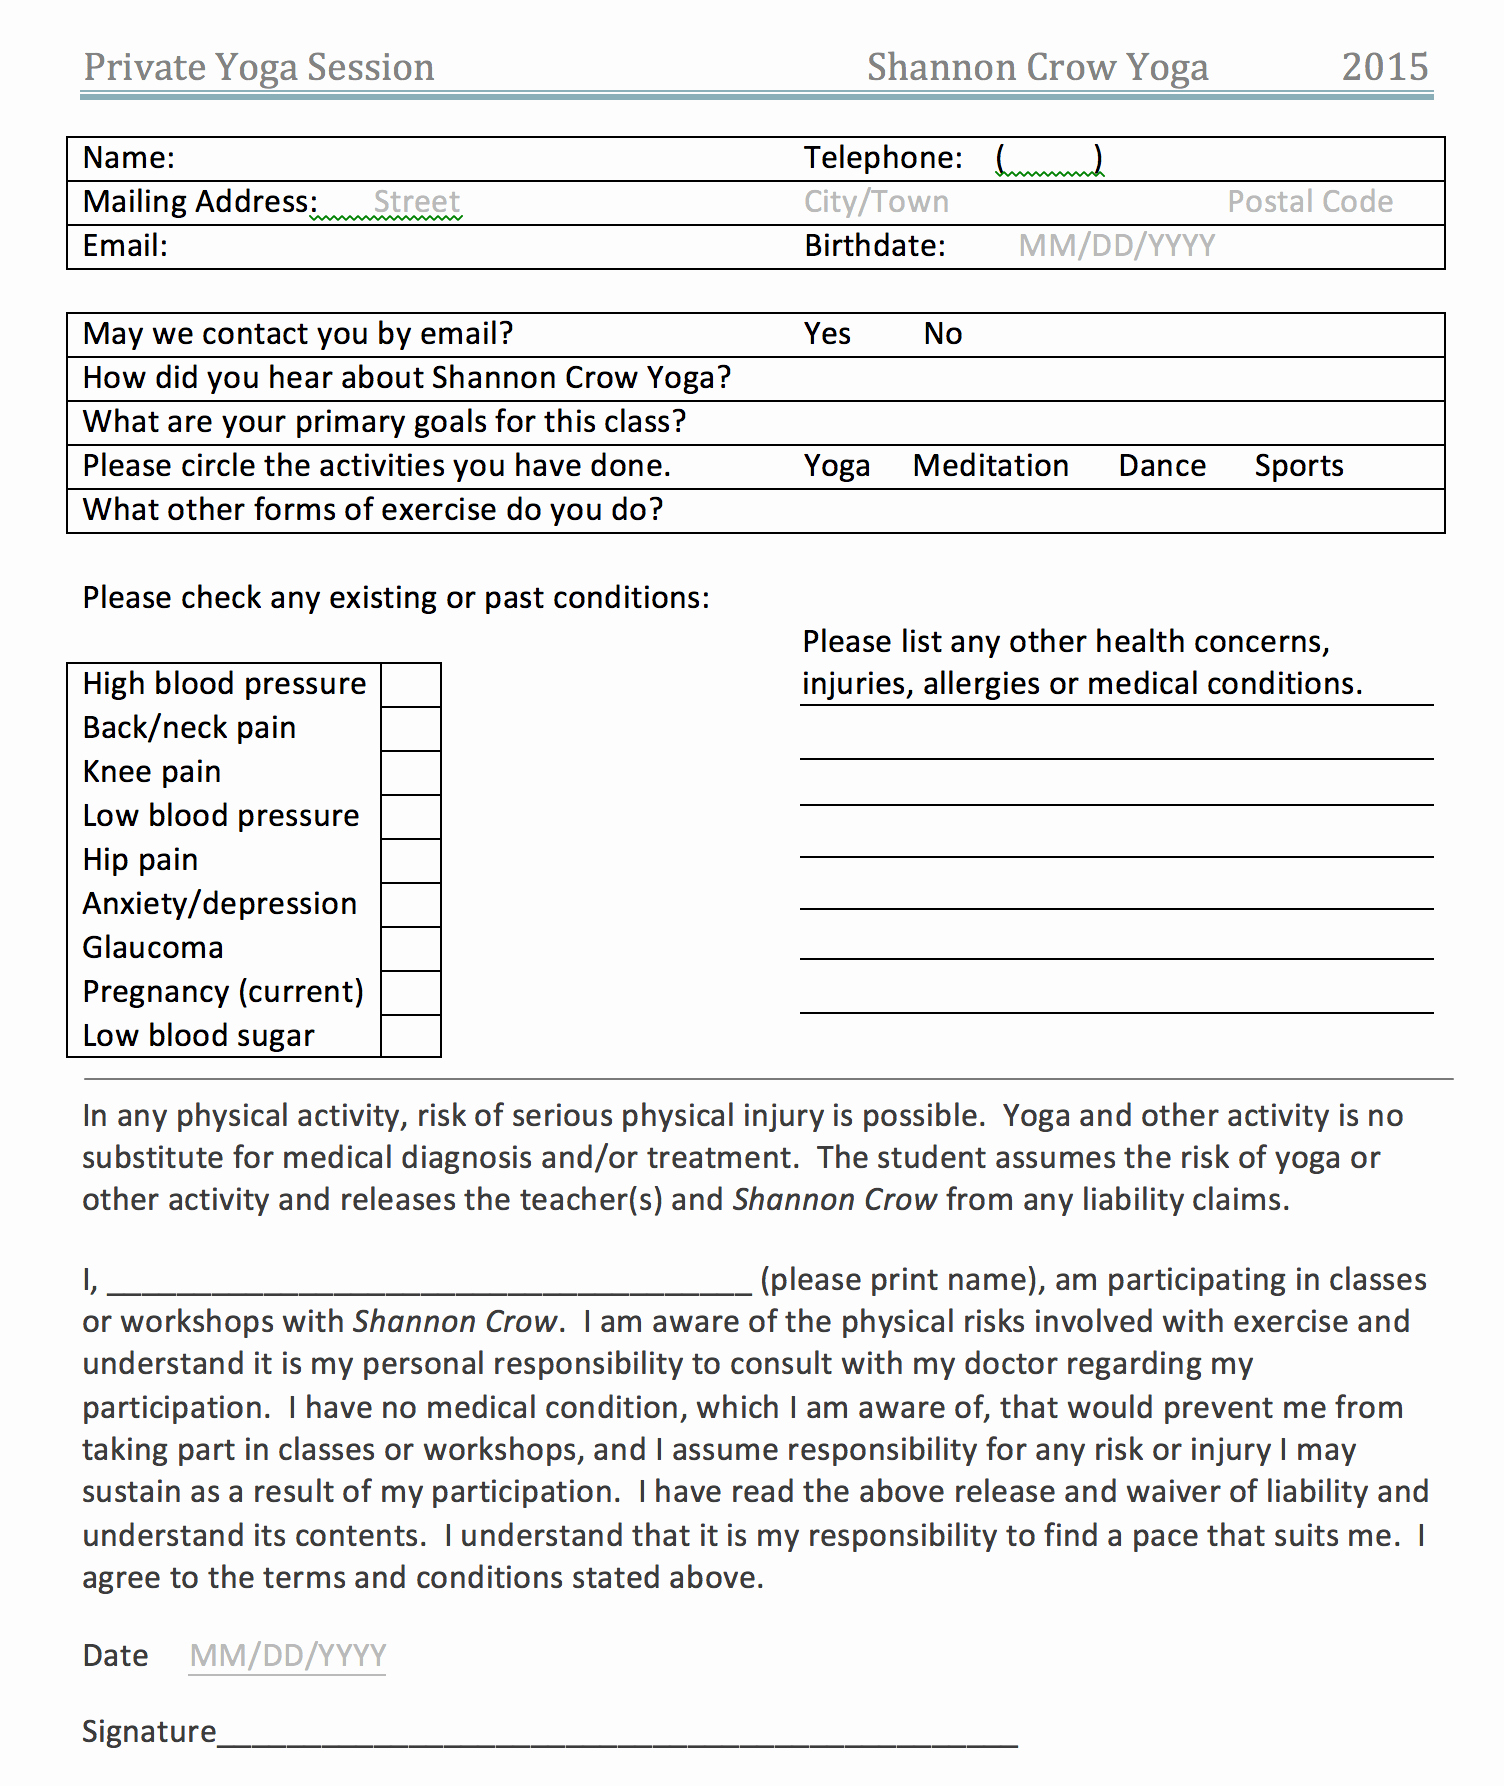 Yoga Waiver form Template Luxury Private Yoga Class Waiver form Shannon Crow